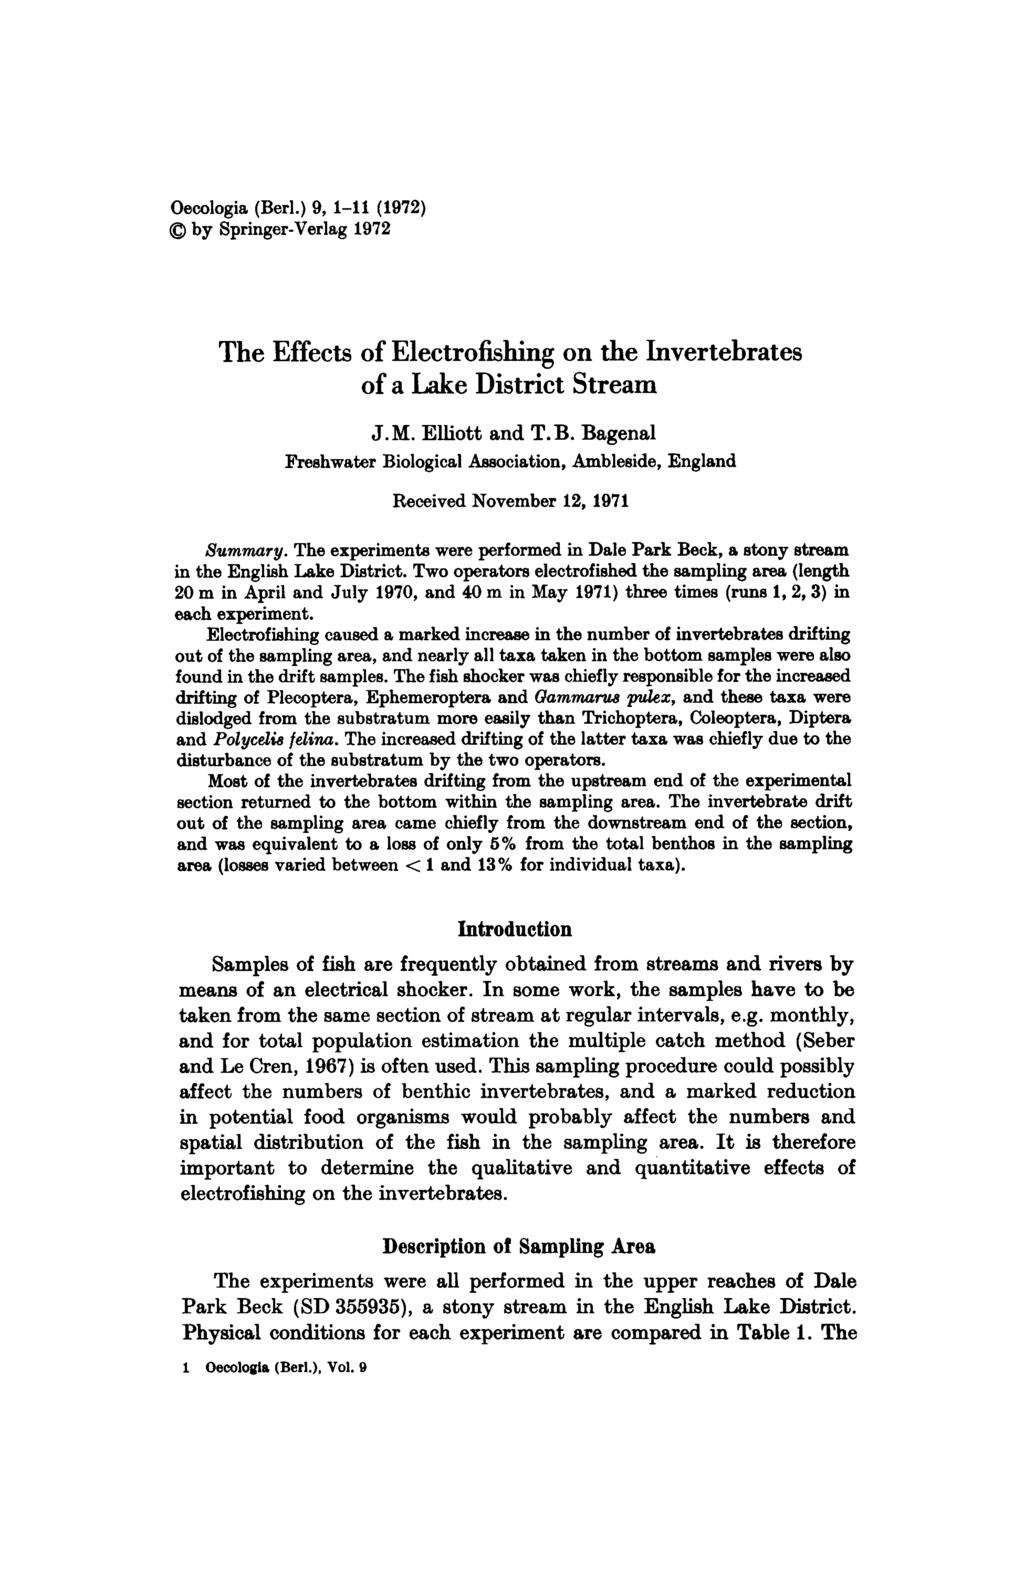 Oecologia (Beri.) 9, - (97) by Springer-Verlag 97 The Effects of Electrofishing on the Invertebrates of a Lake District Stream J.M. Elliott and T.B. Bagenal Freshwater Biological Association, Ambleside, England Received November, 97 Summary.